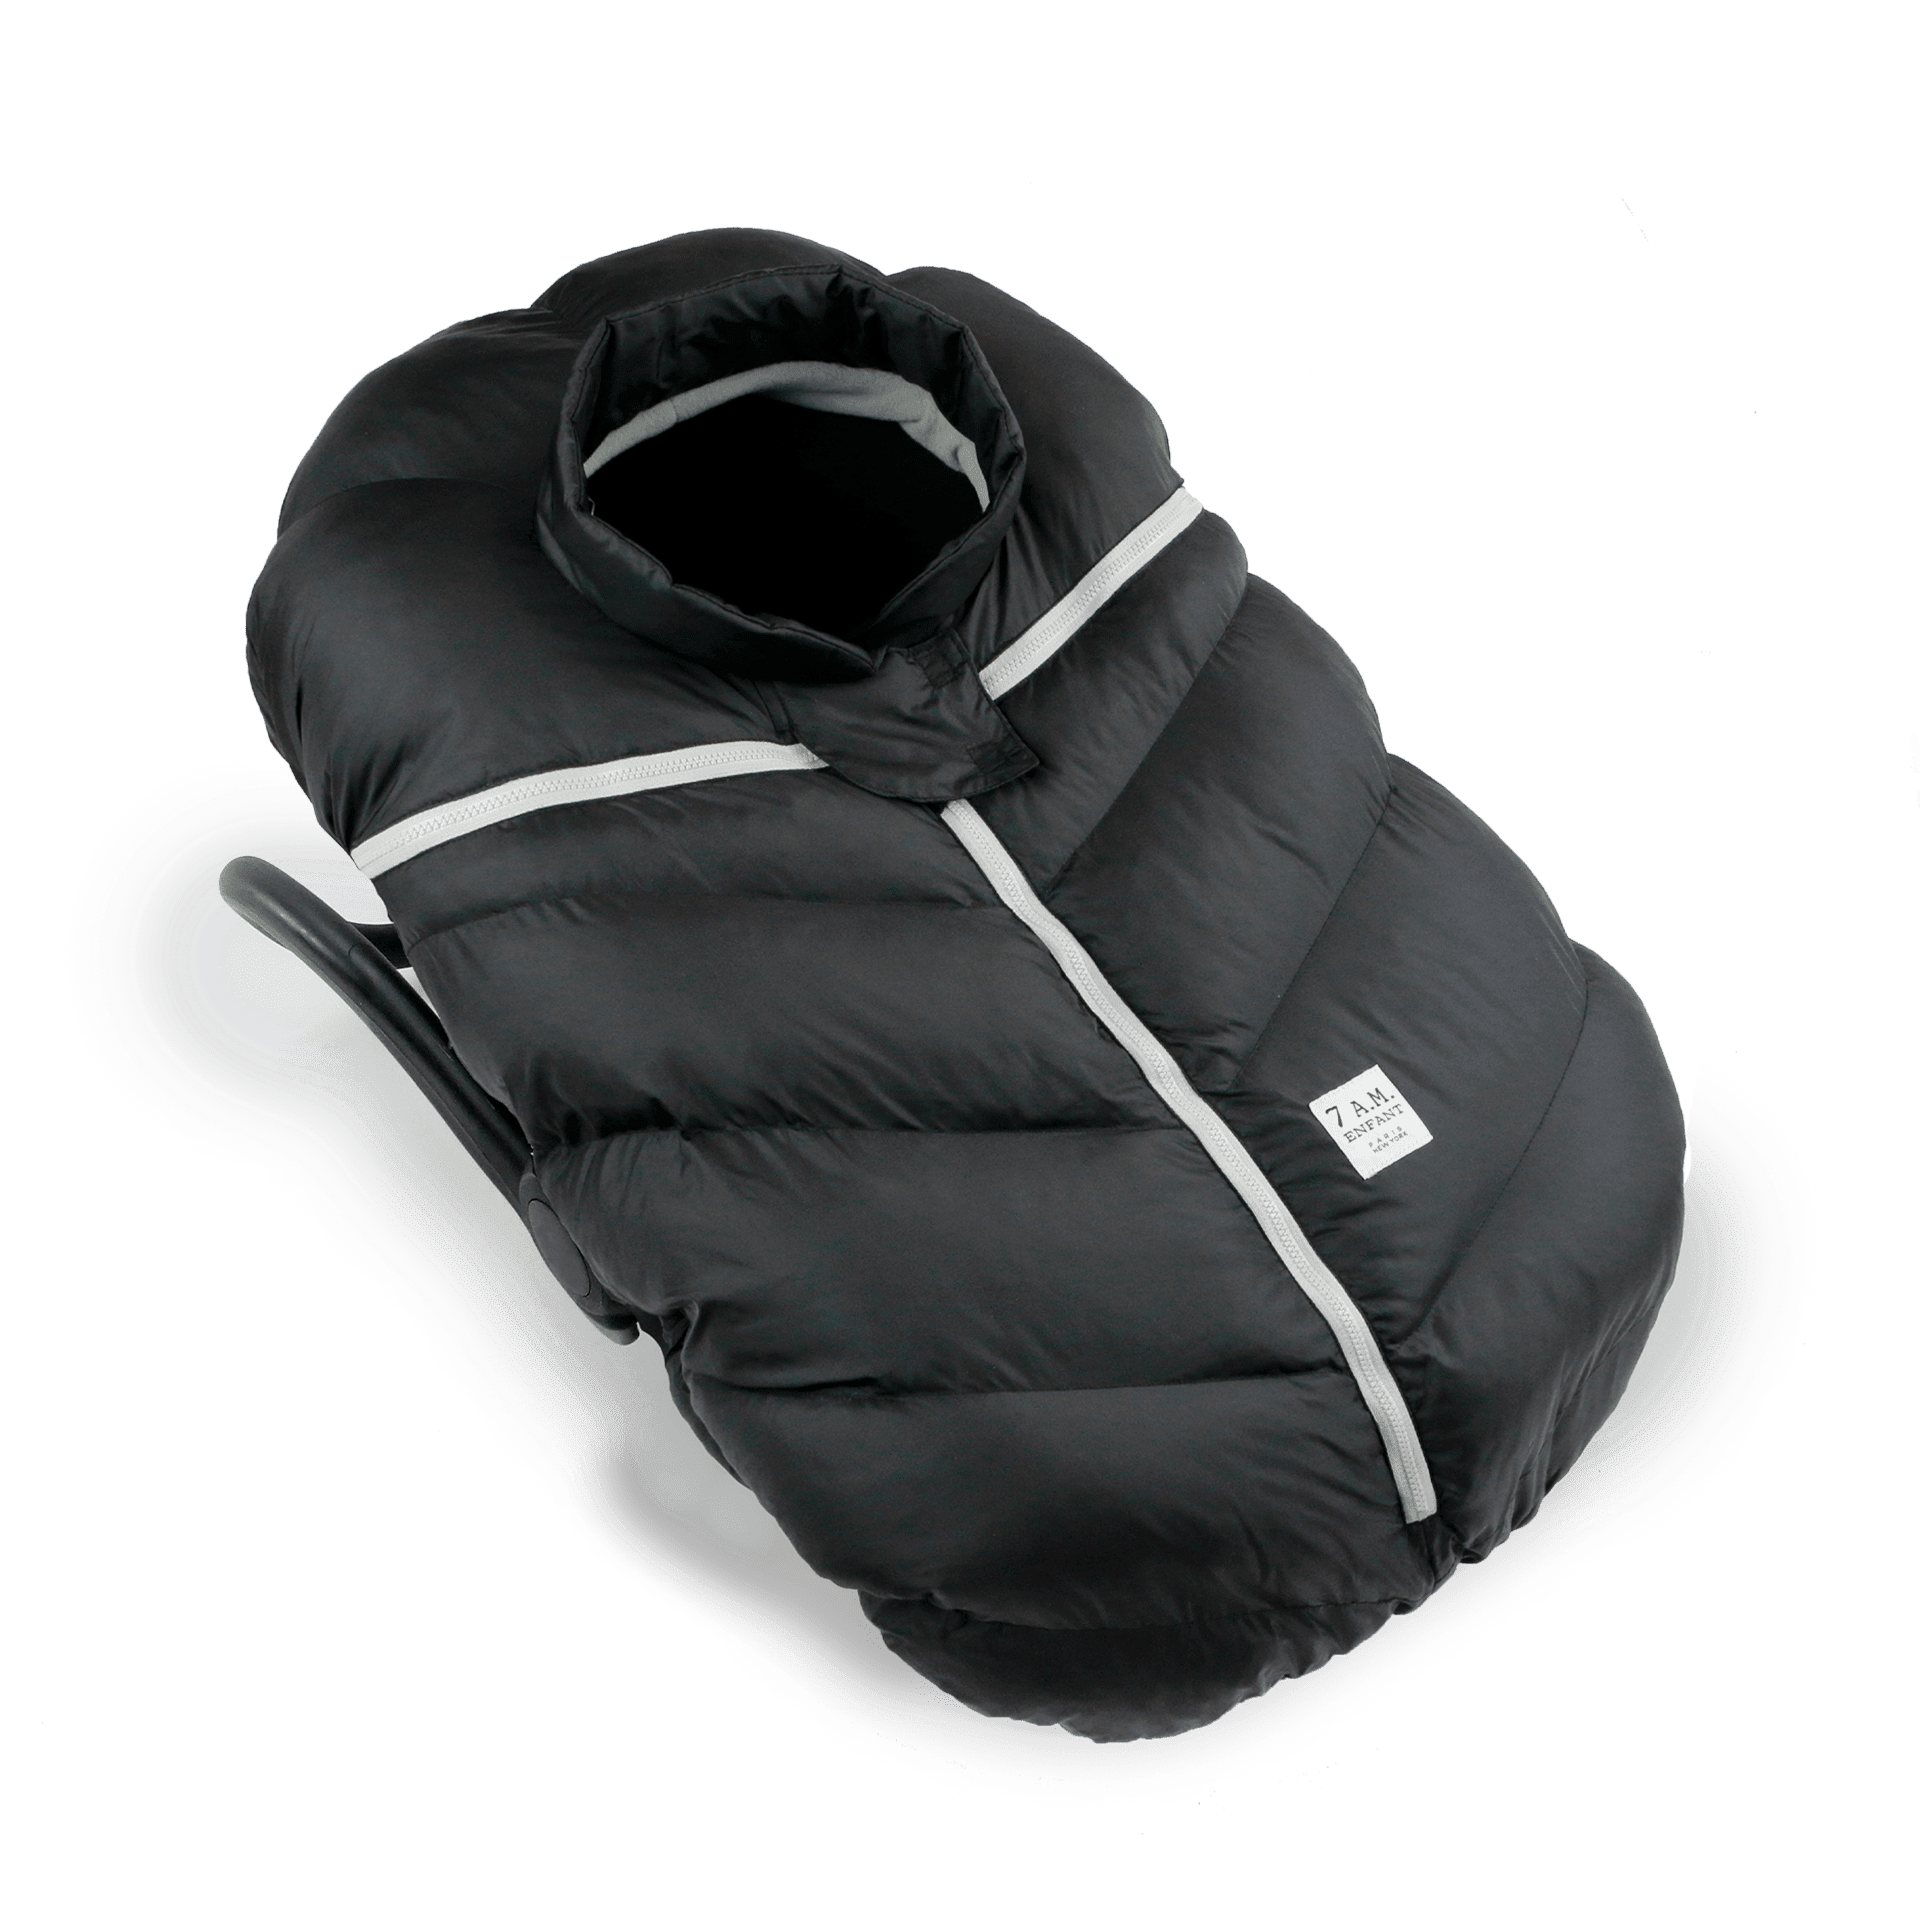 7 AM Enfant Car Seat Cocoon Baby Cover, Black, 0-12M - ANB Baby -7 AM car seat cocoon